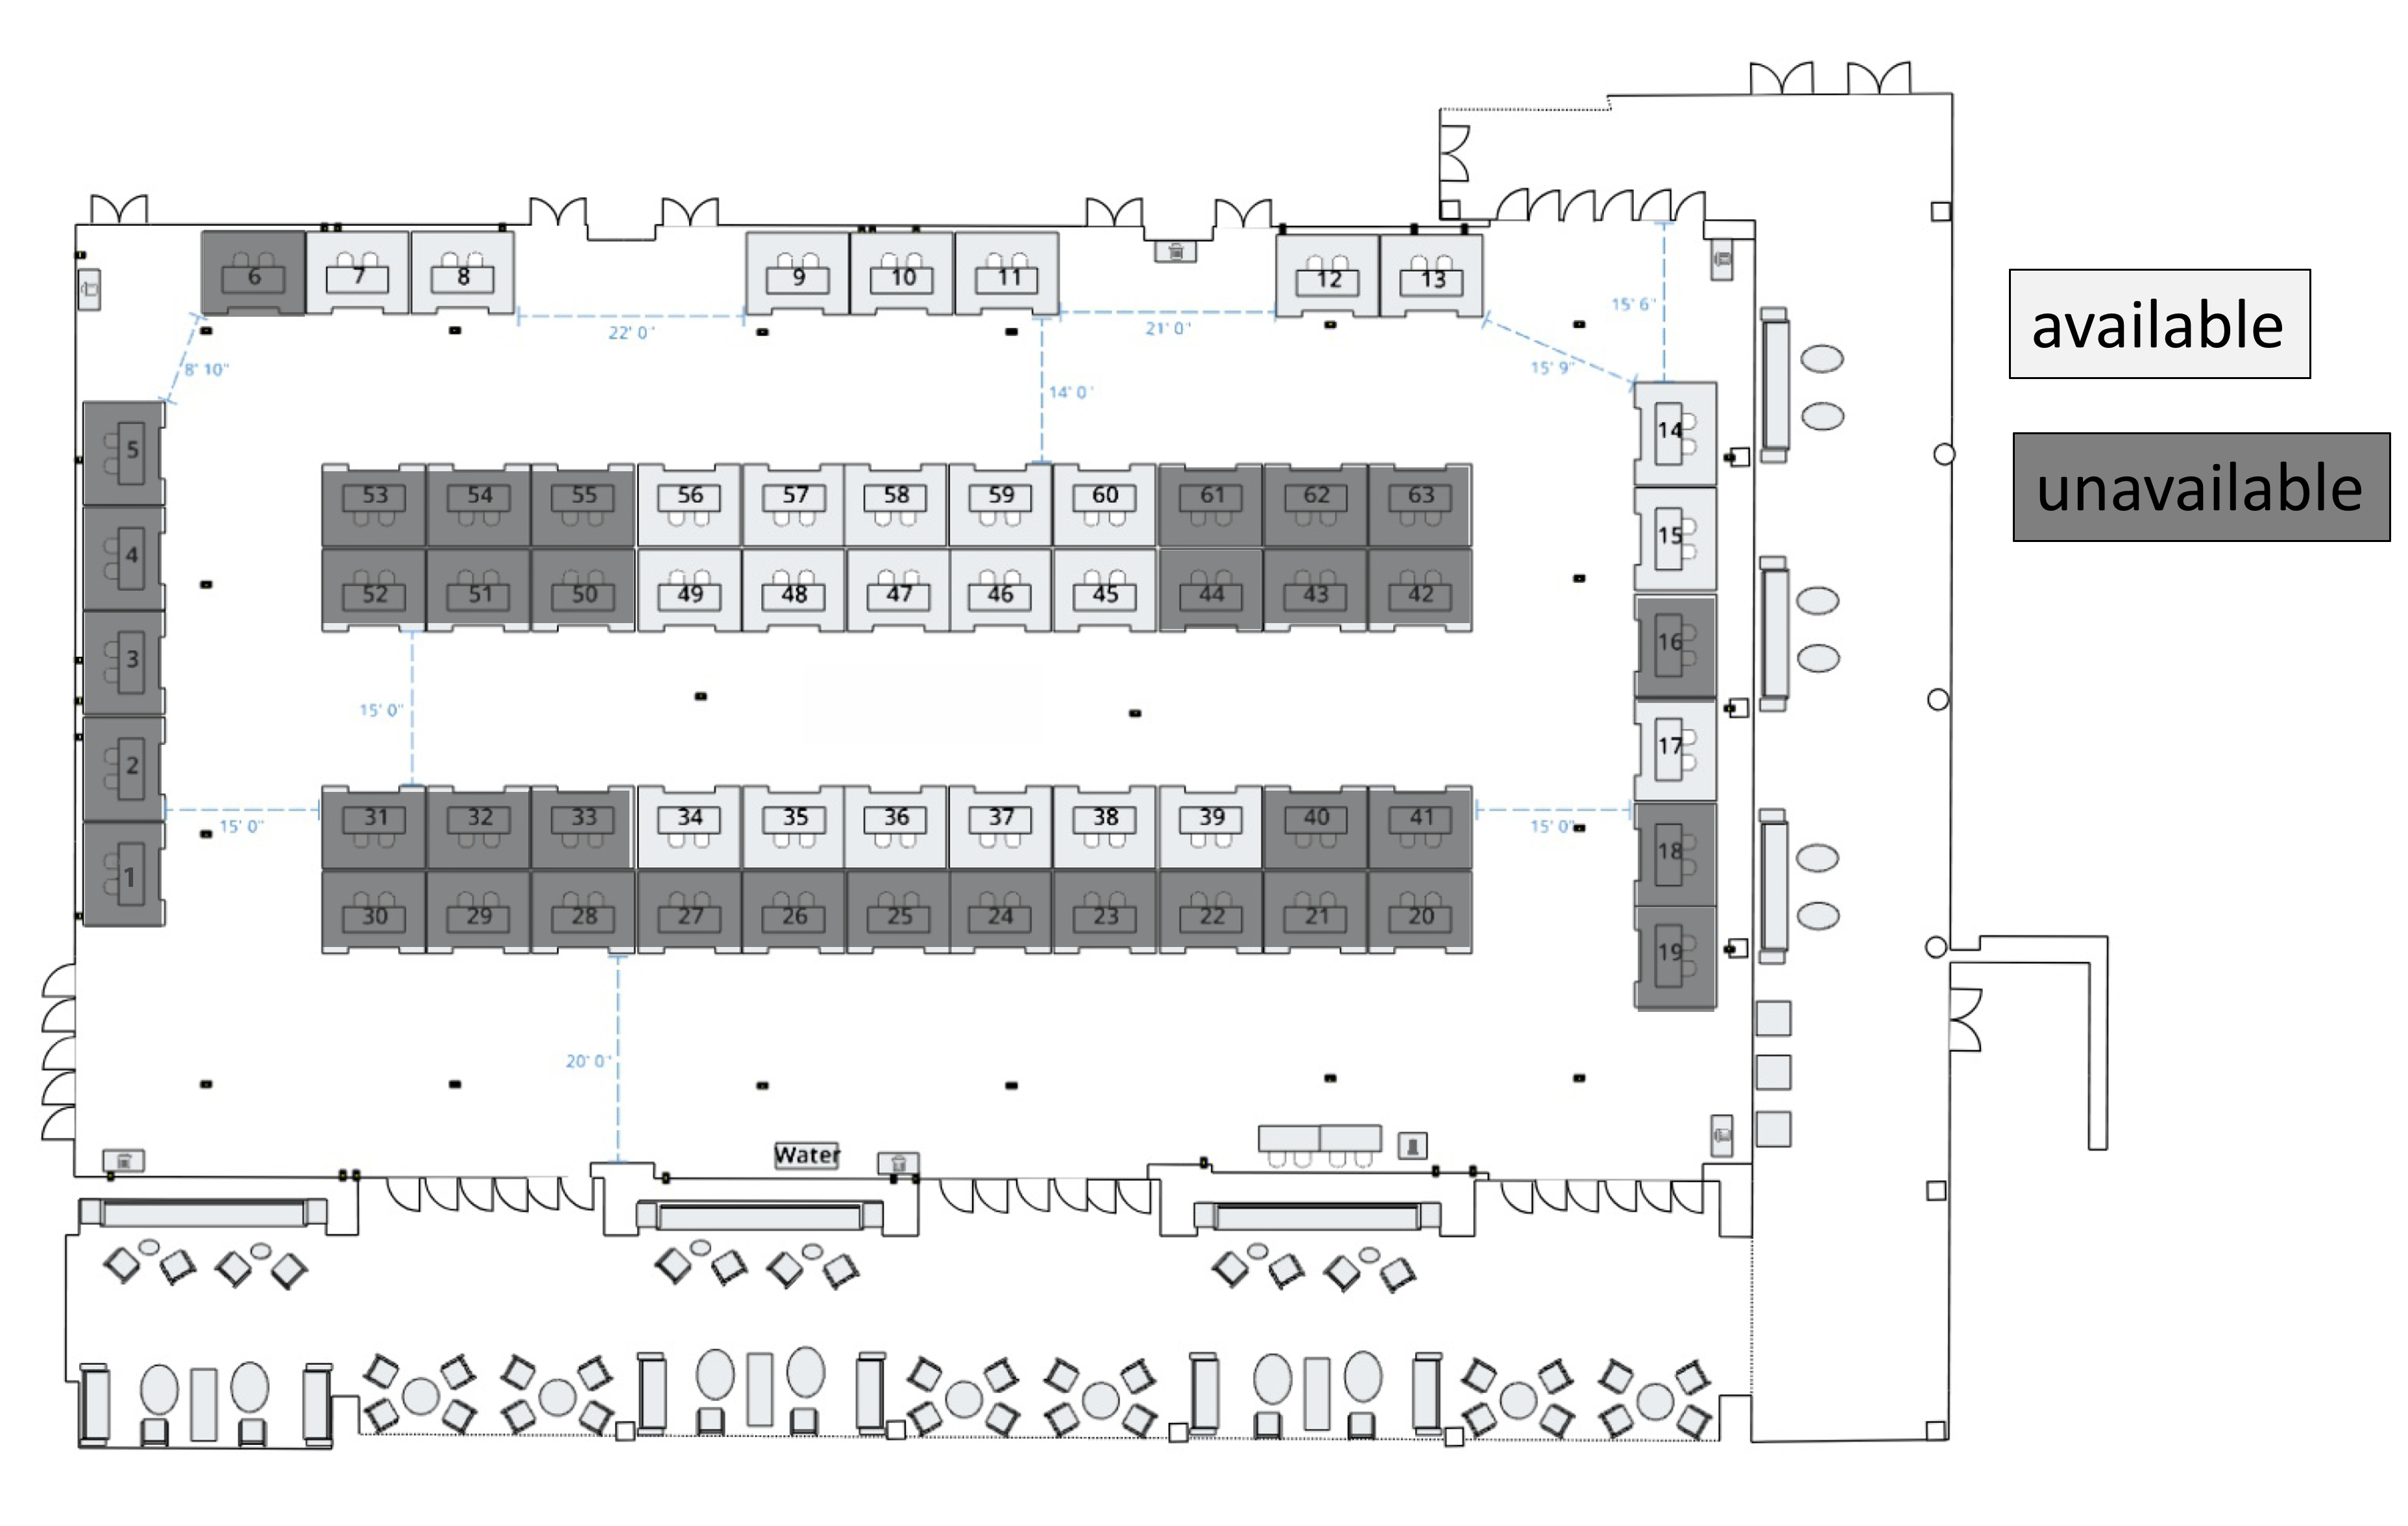 map of booths in exhibit hall